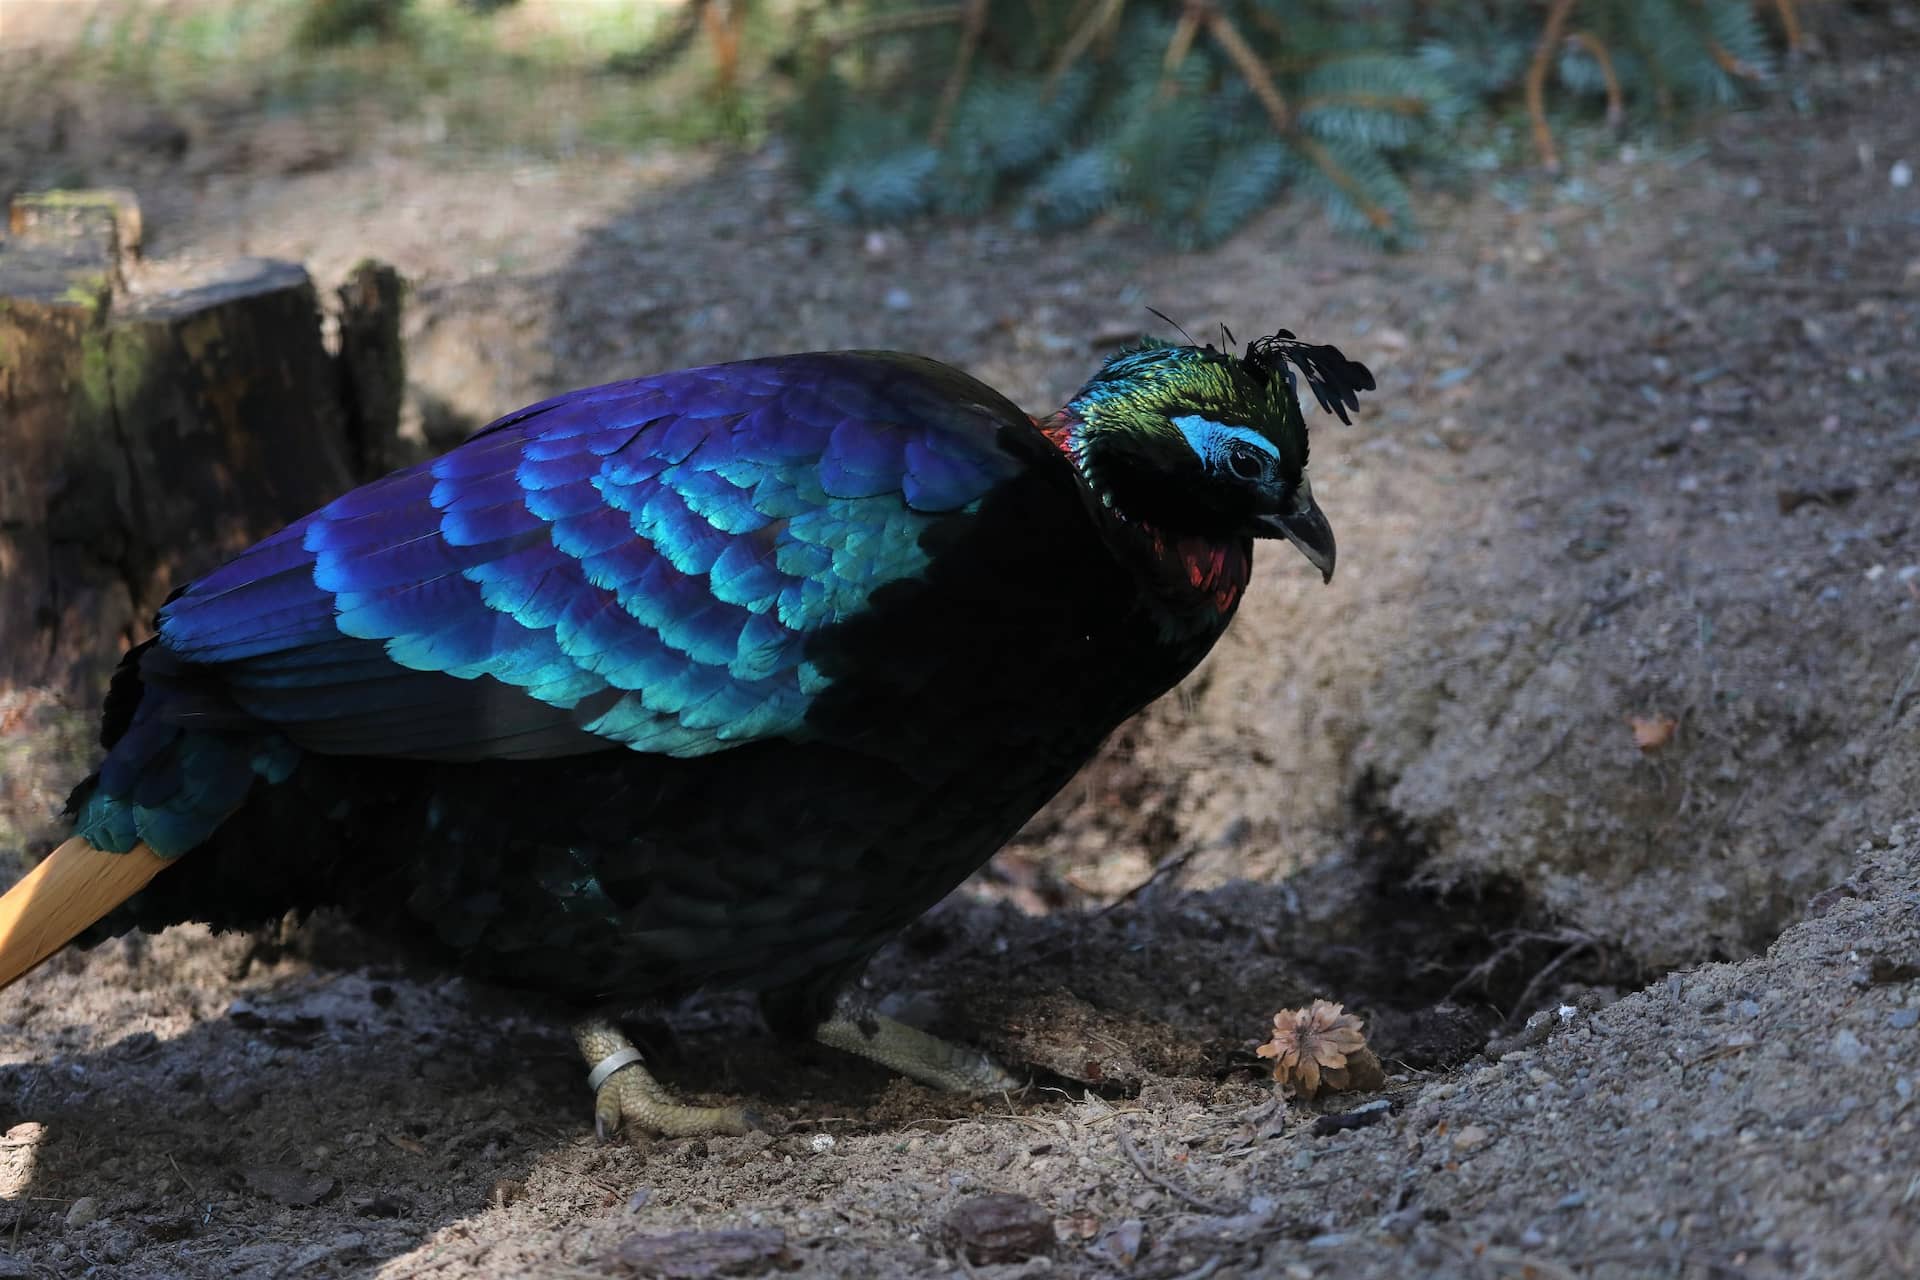 A male Himalayan monal sitting on the ground. He has brightly coloured feathers that are blue and green IMAGE: Amy Middleton 2023